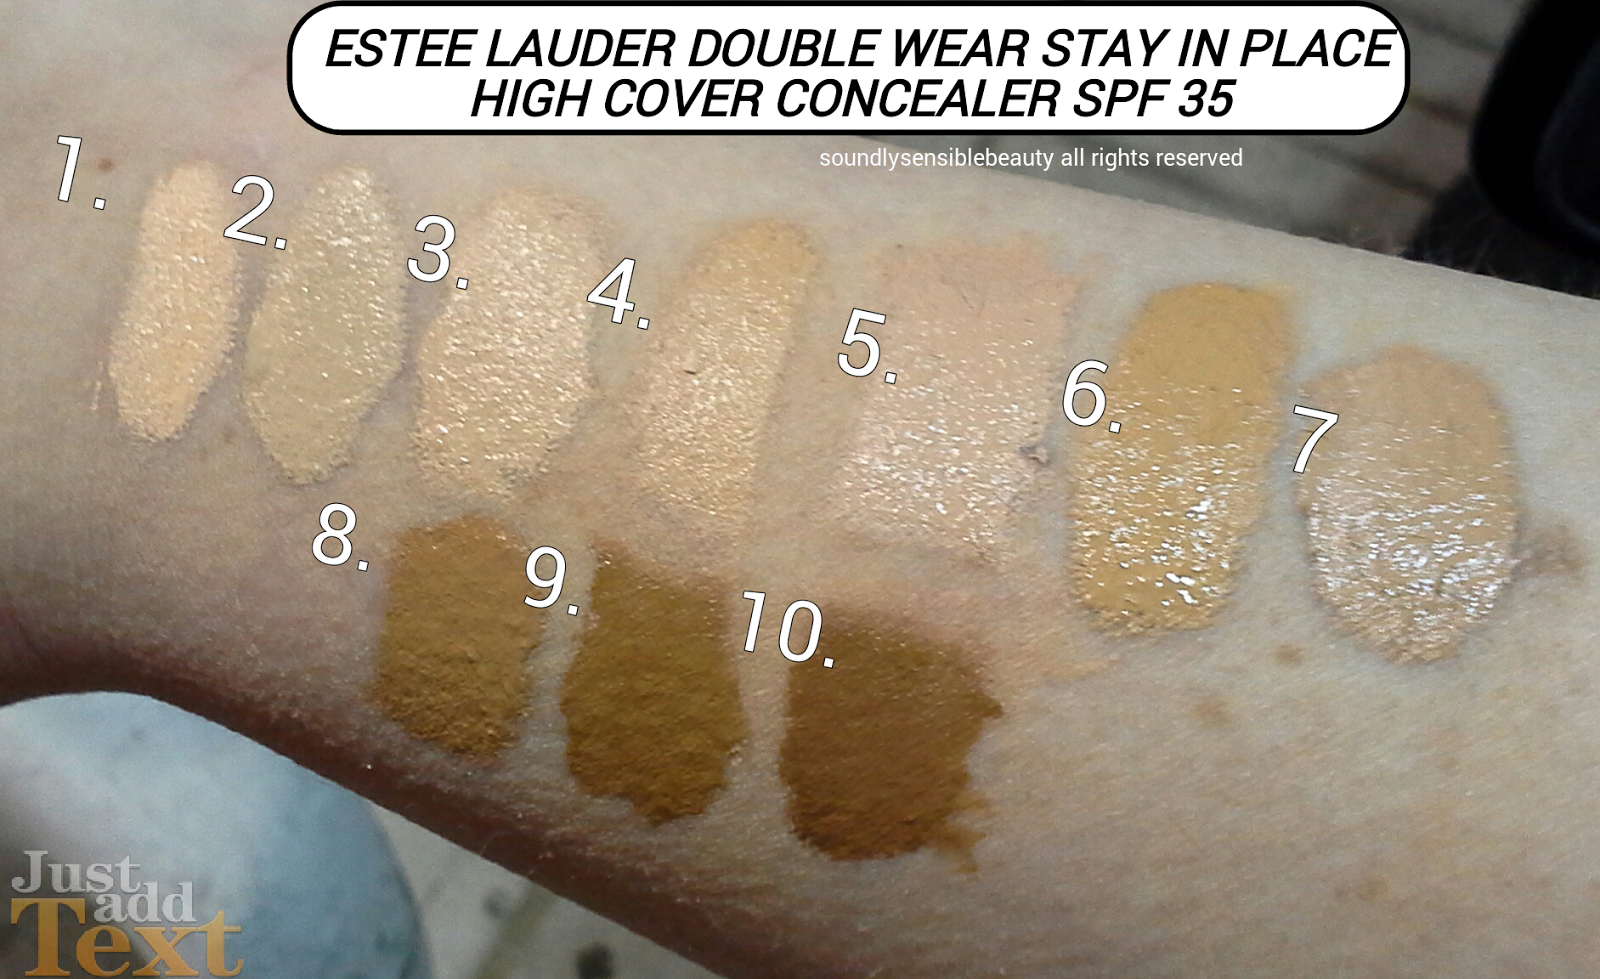 Estee Lauder Double Wear Cover Concealer & Swatches of Shades